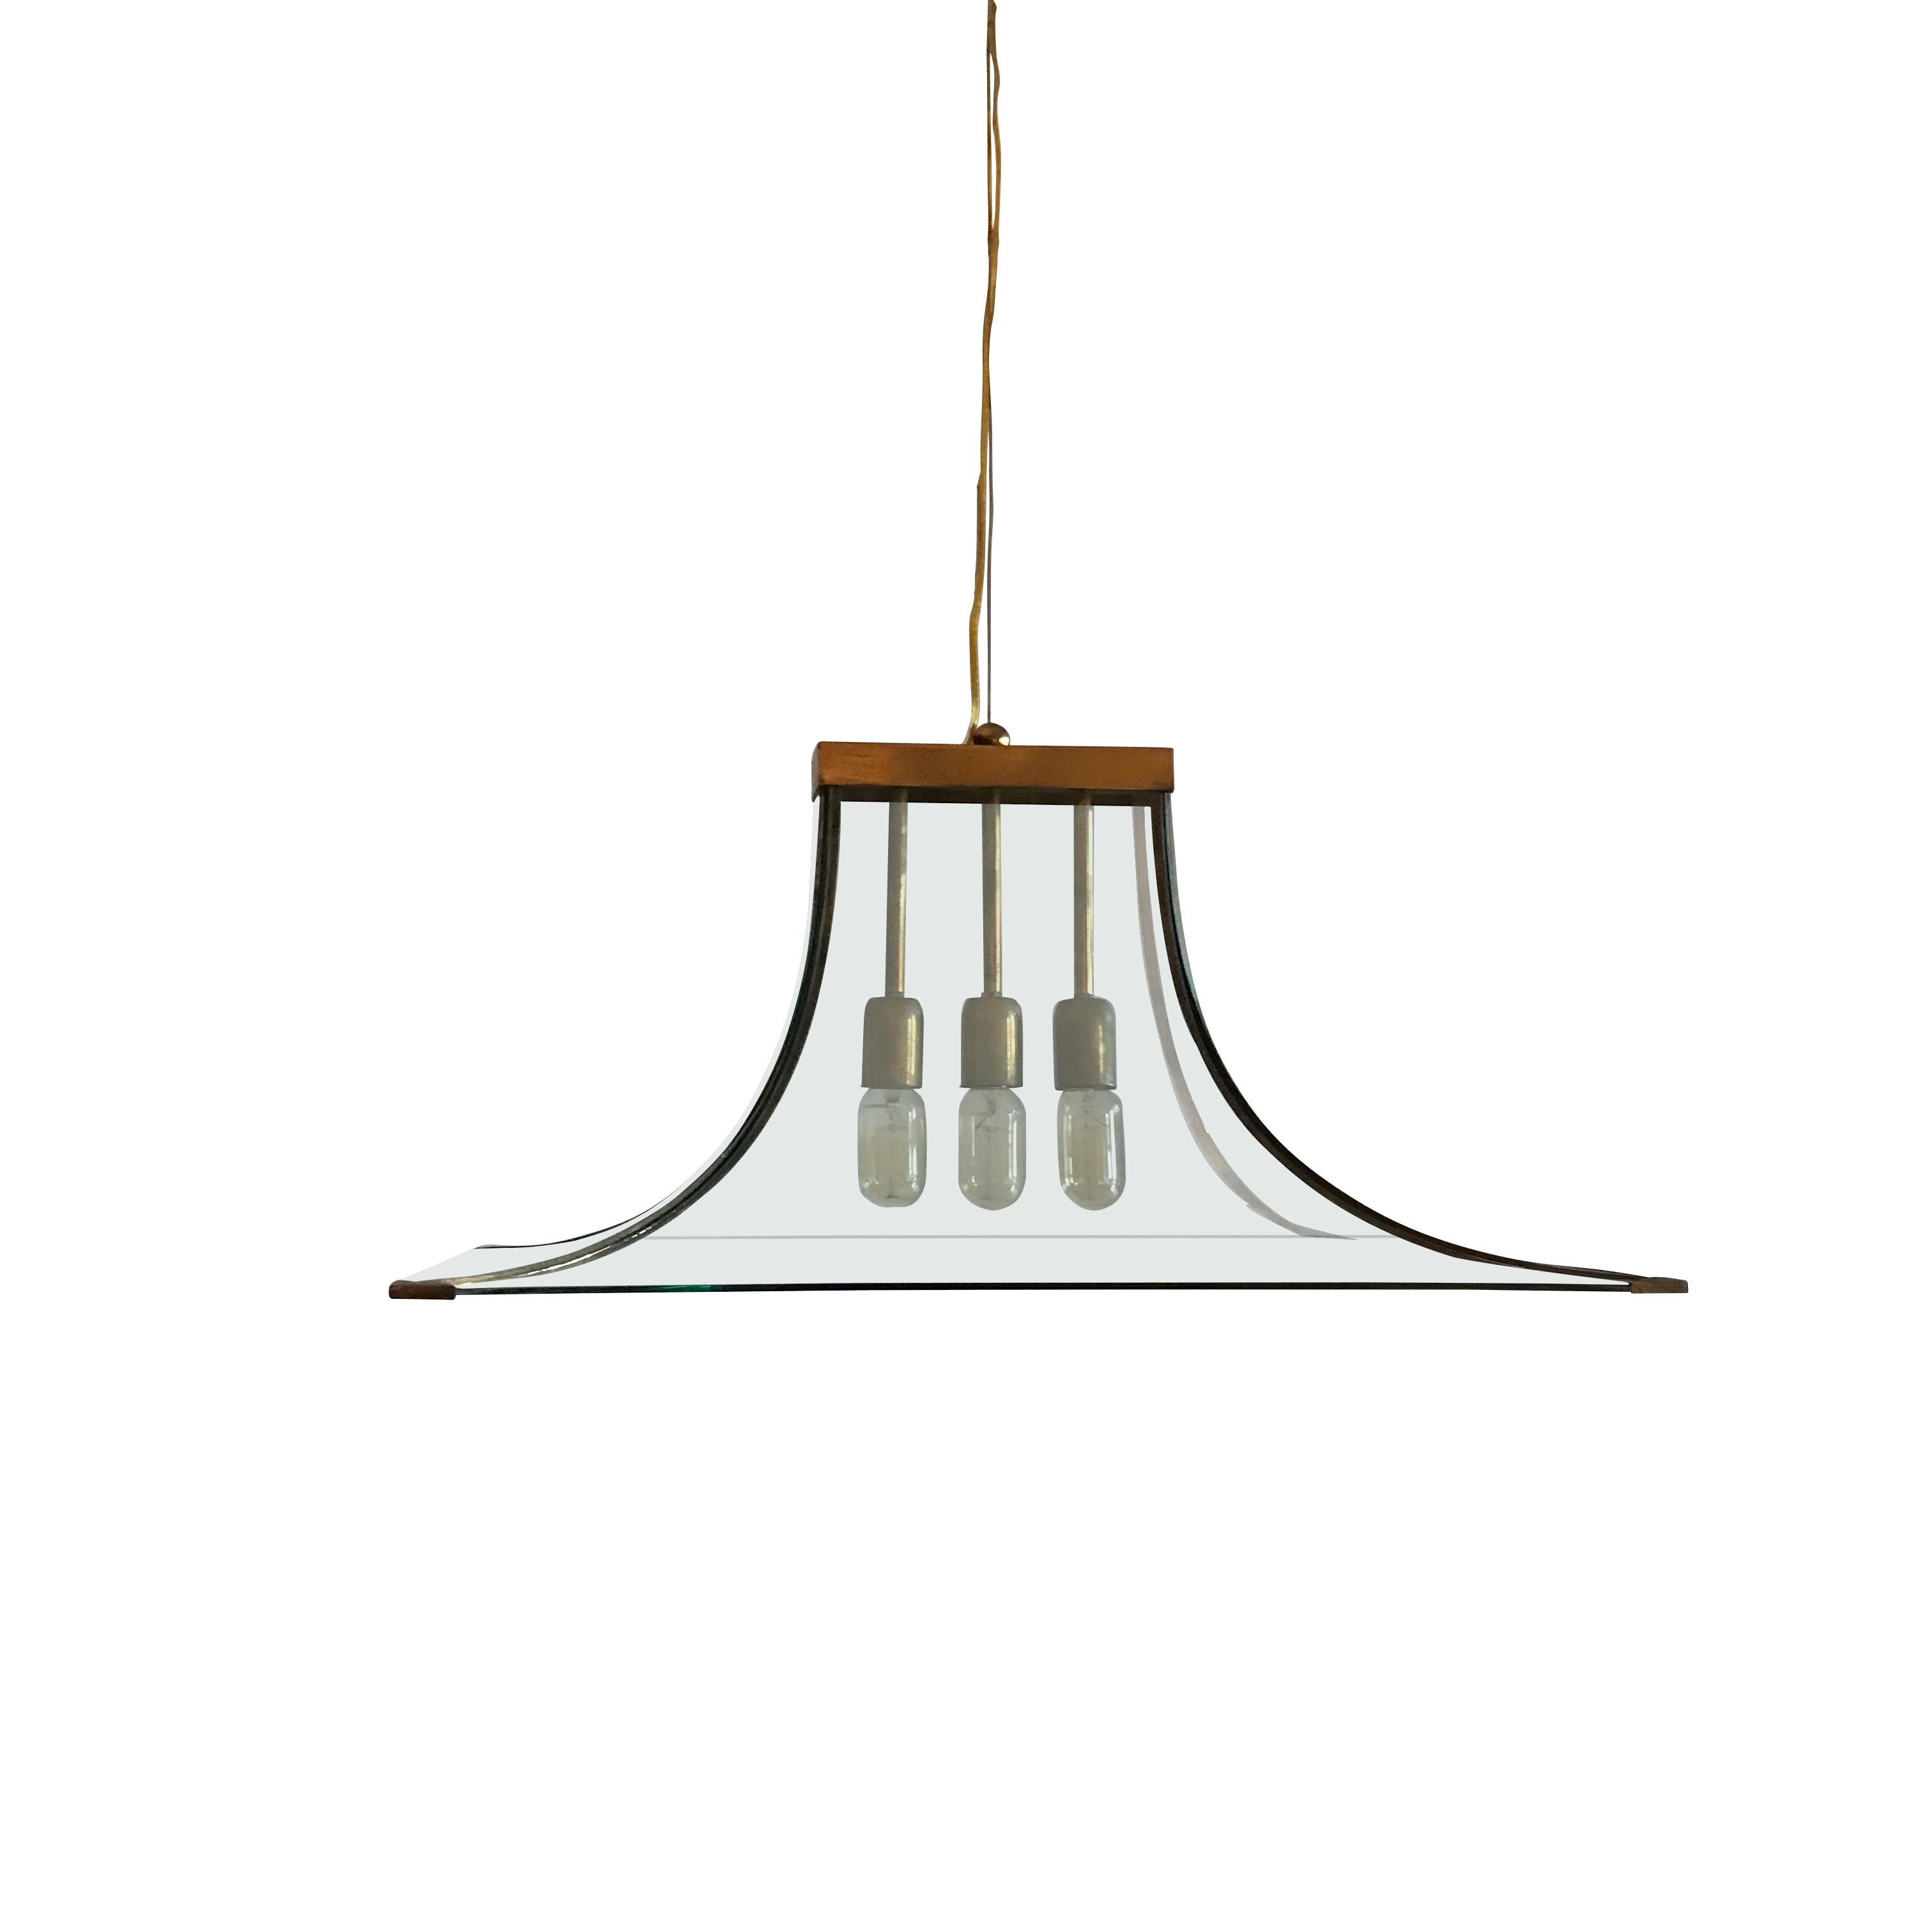 Rectangular curved clear glass chandelier with brass trim.
Three brass sockets and brass strips at the four edges.
Canopy is included.
Recently rewired.